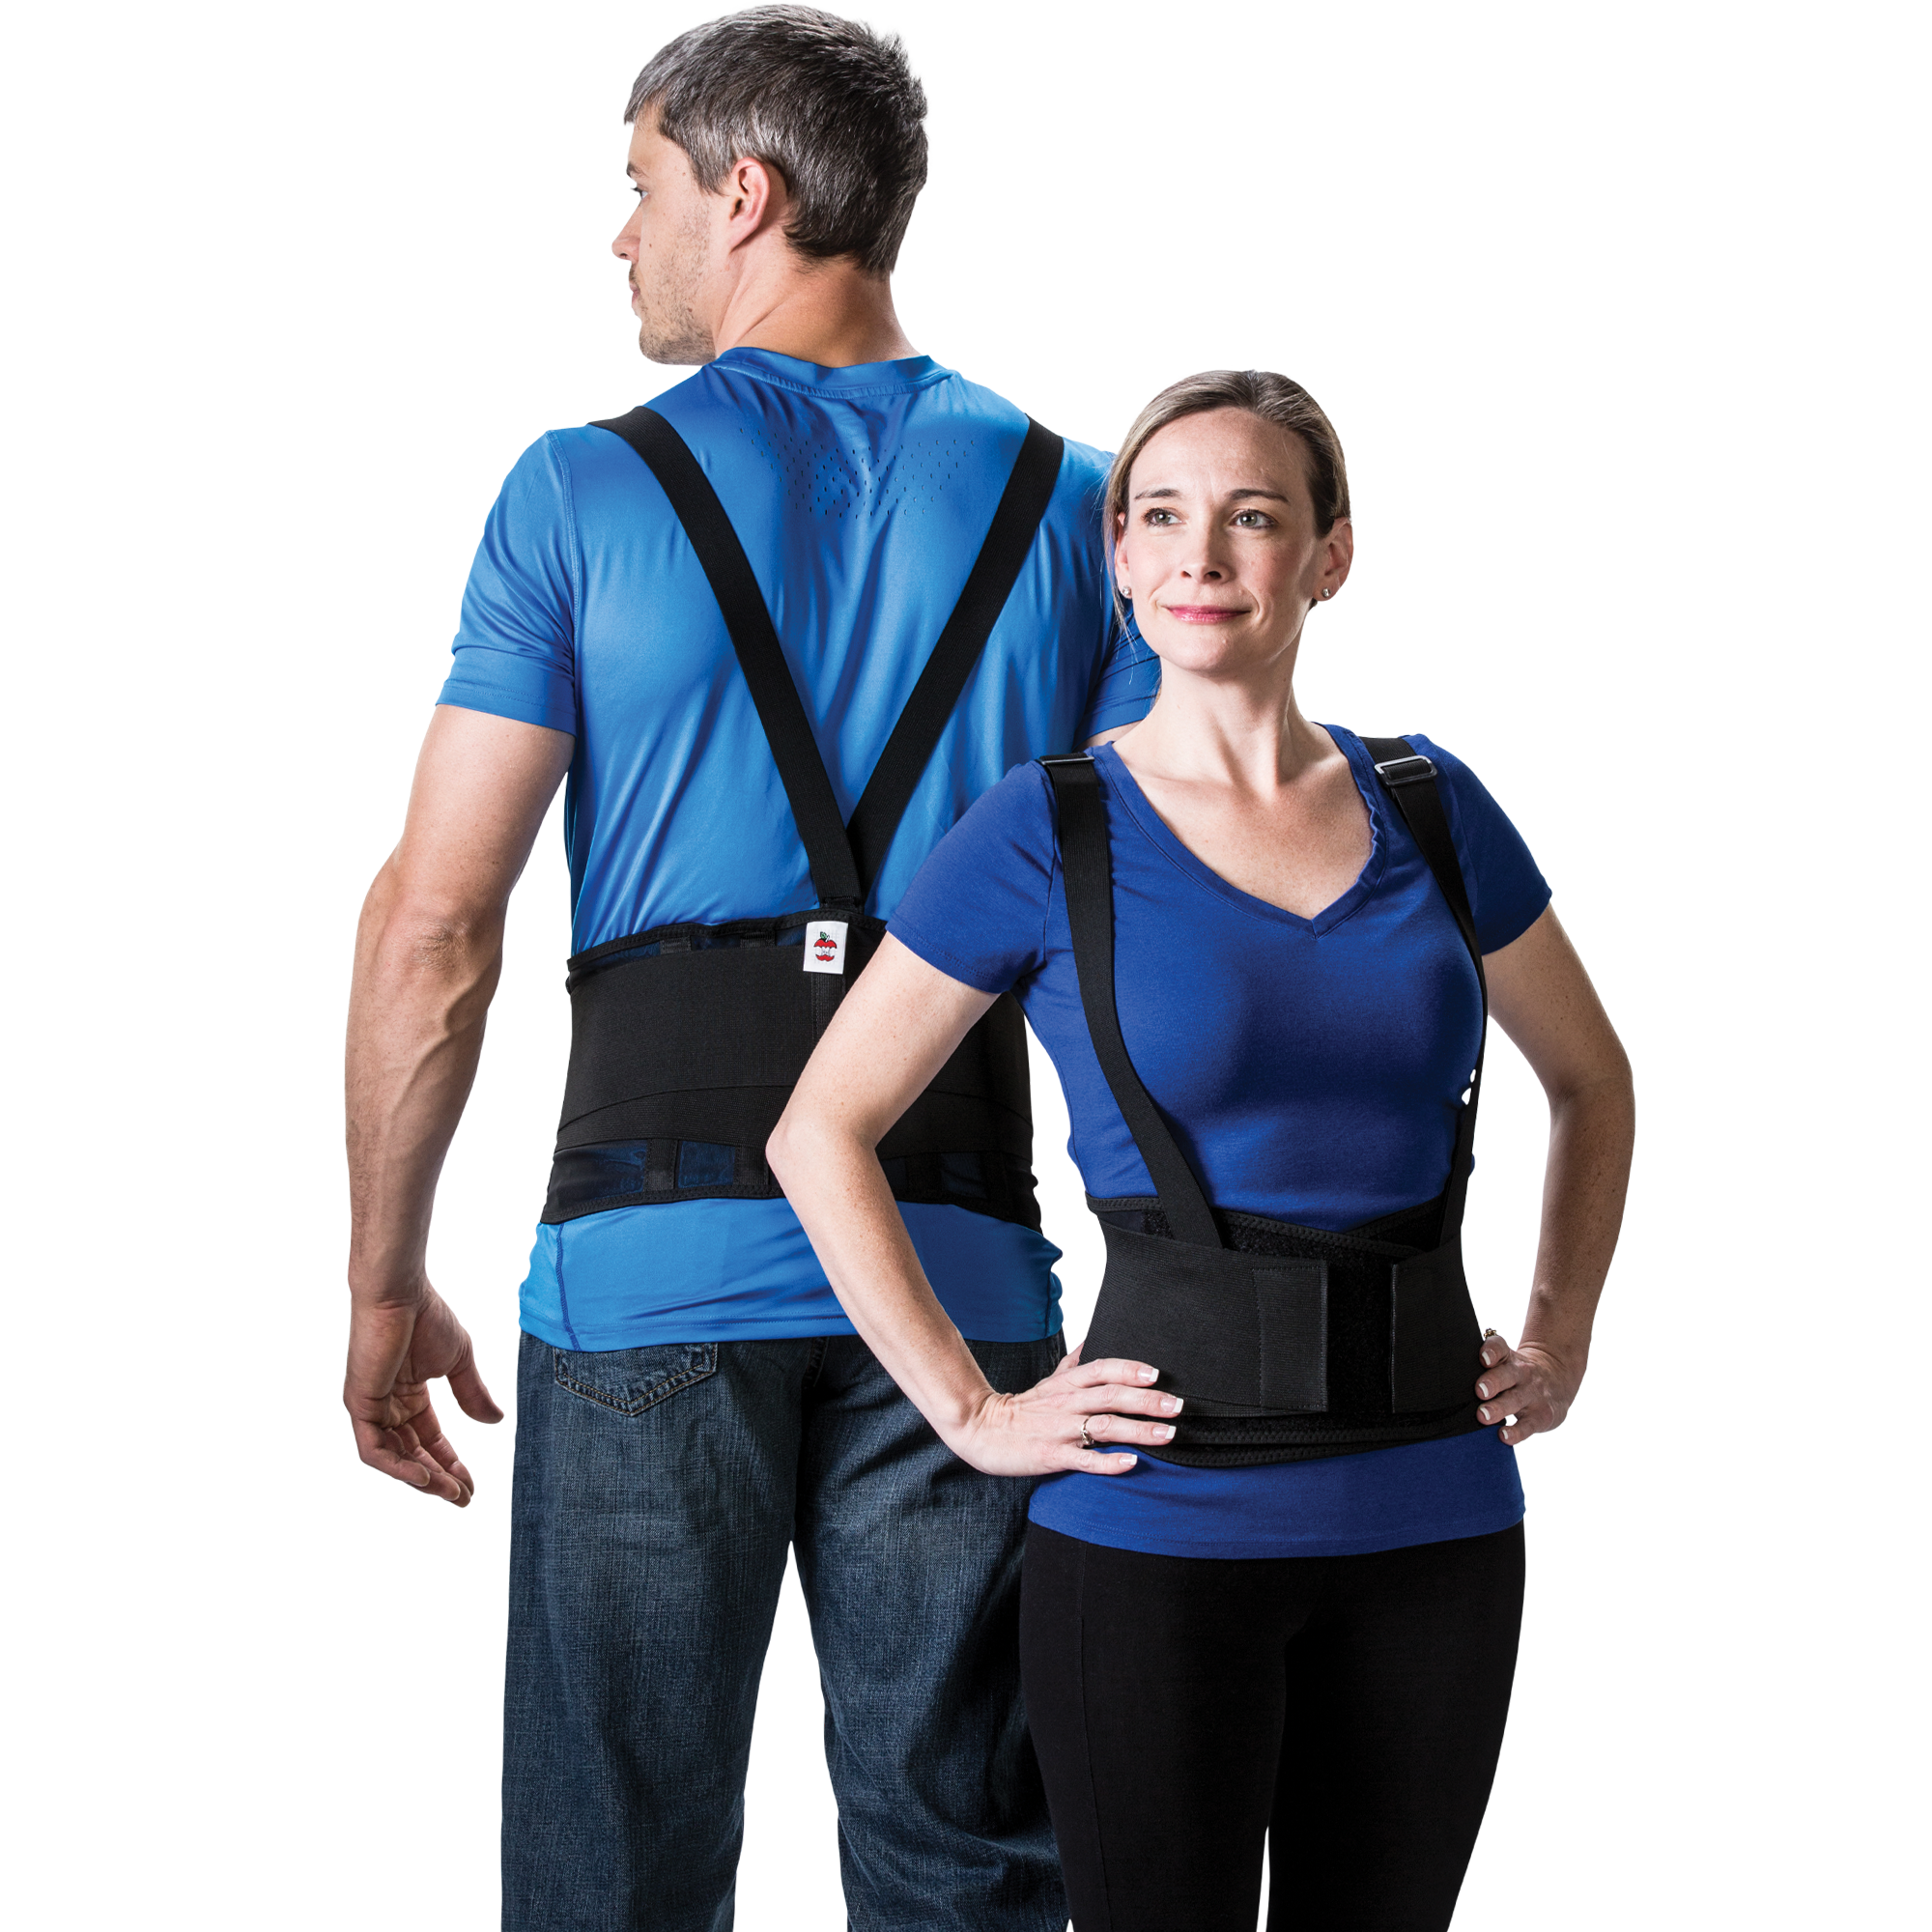 Back Braces : Buy Back Braces & Support Online in Canada at Best Price -  Physio Supplies Canada – Physio supplies canada